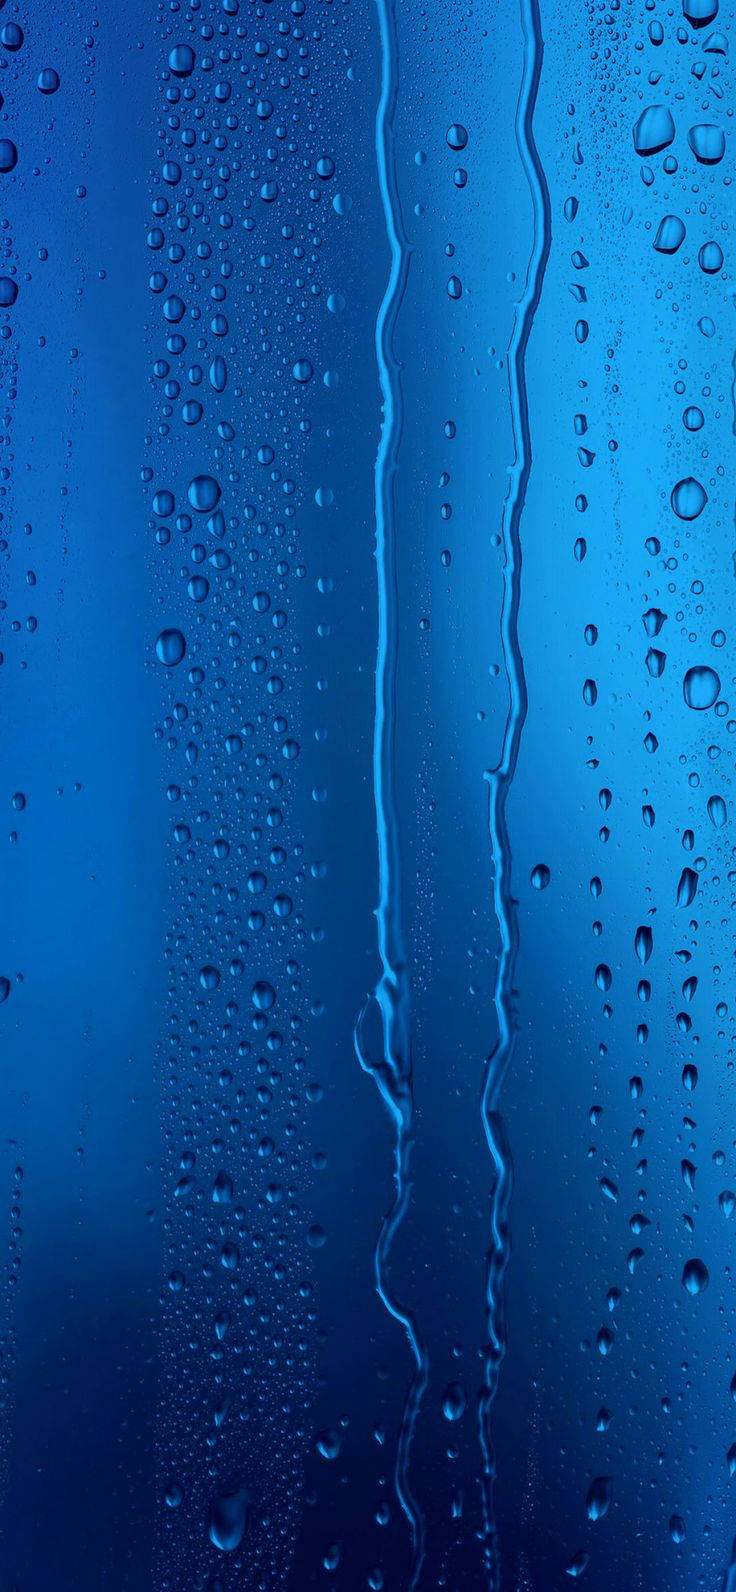 Iphone 12 Pro Water Droplets Wallpaper